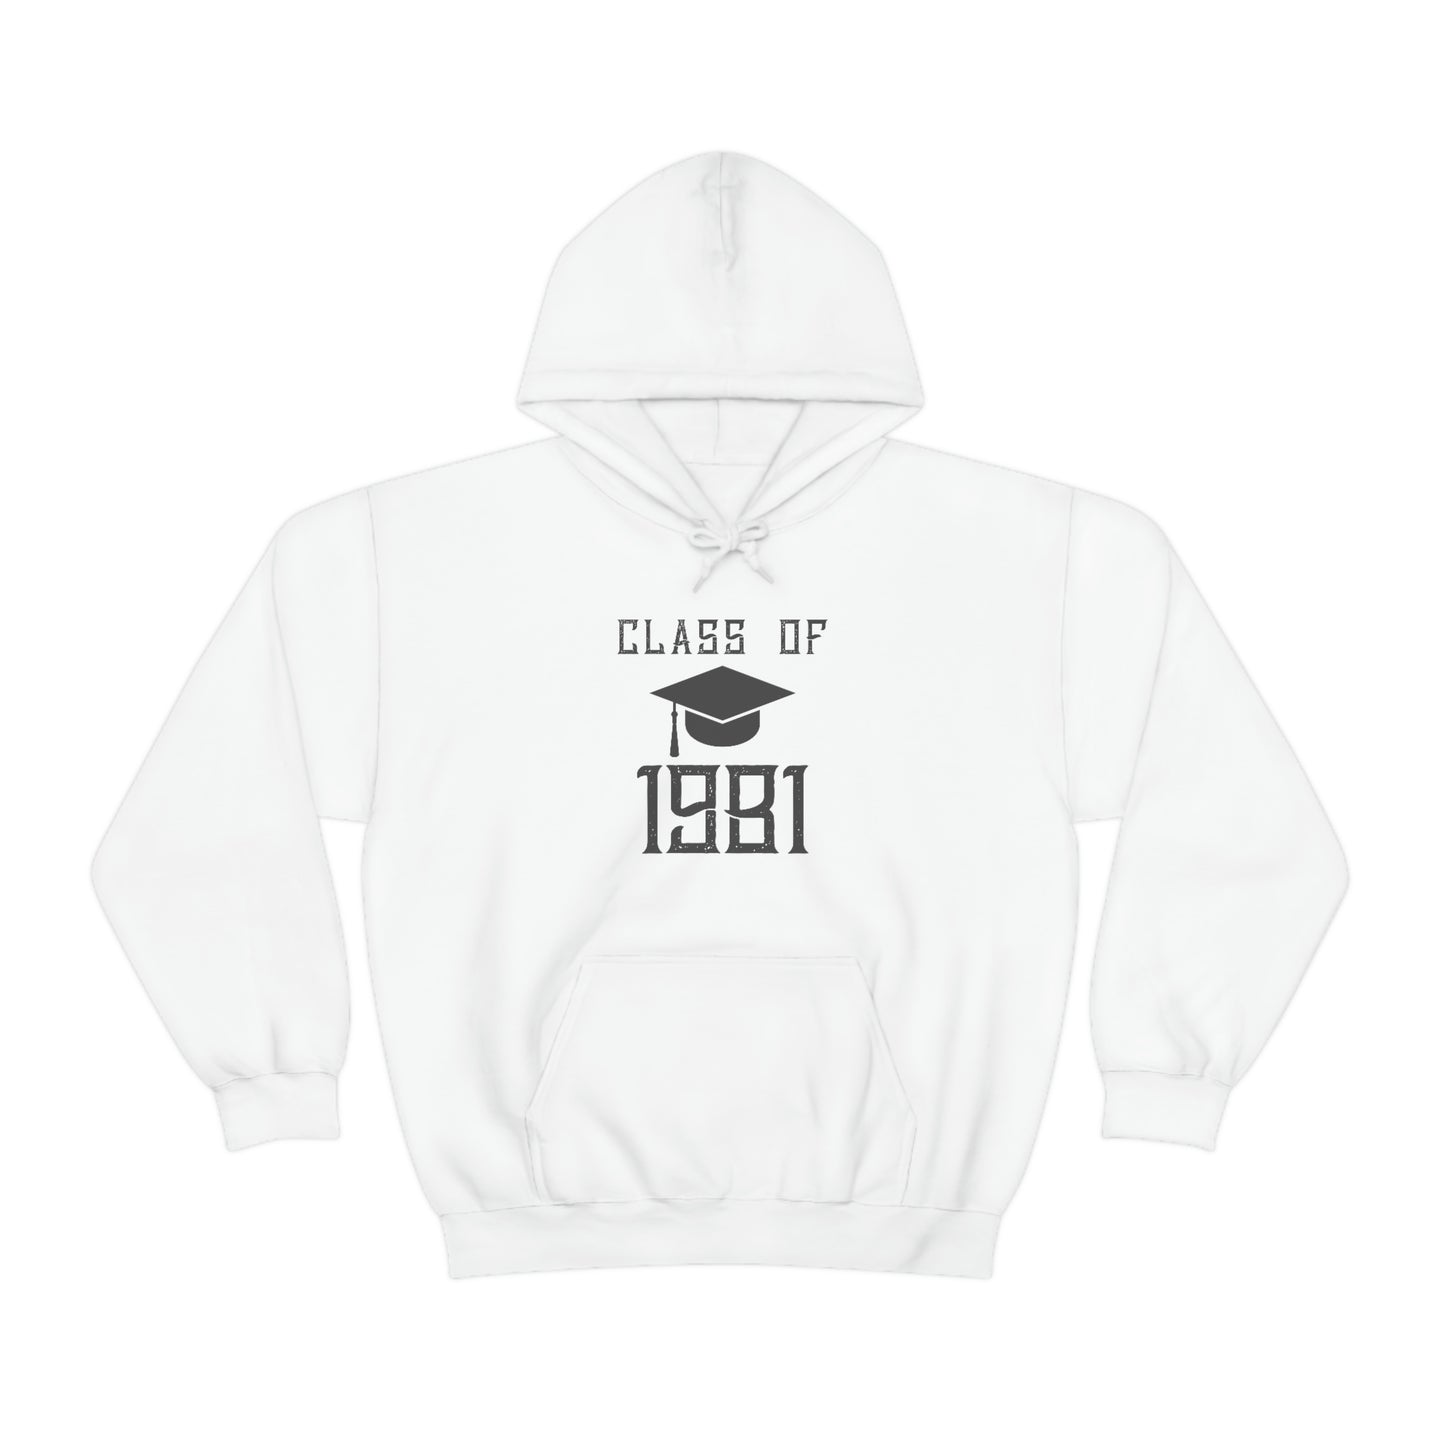 "A tribute to your journey - the 'Class Of 1981' graduation hoodie."